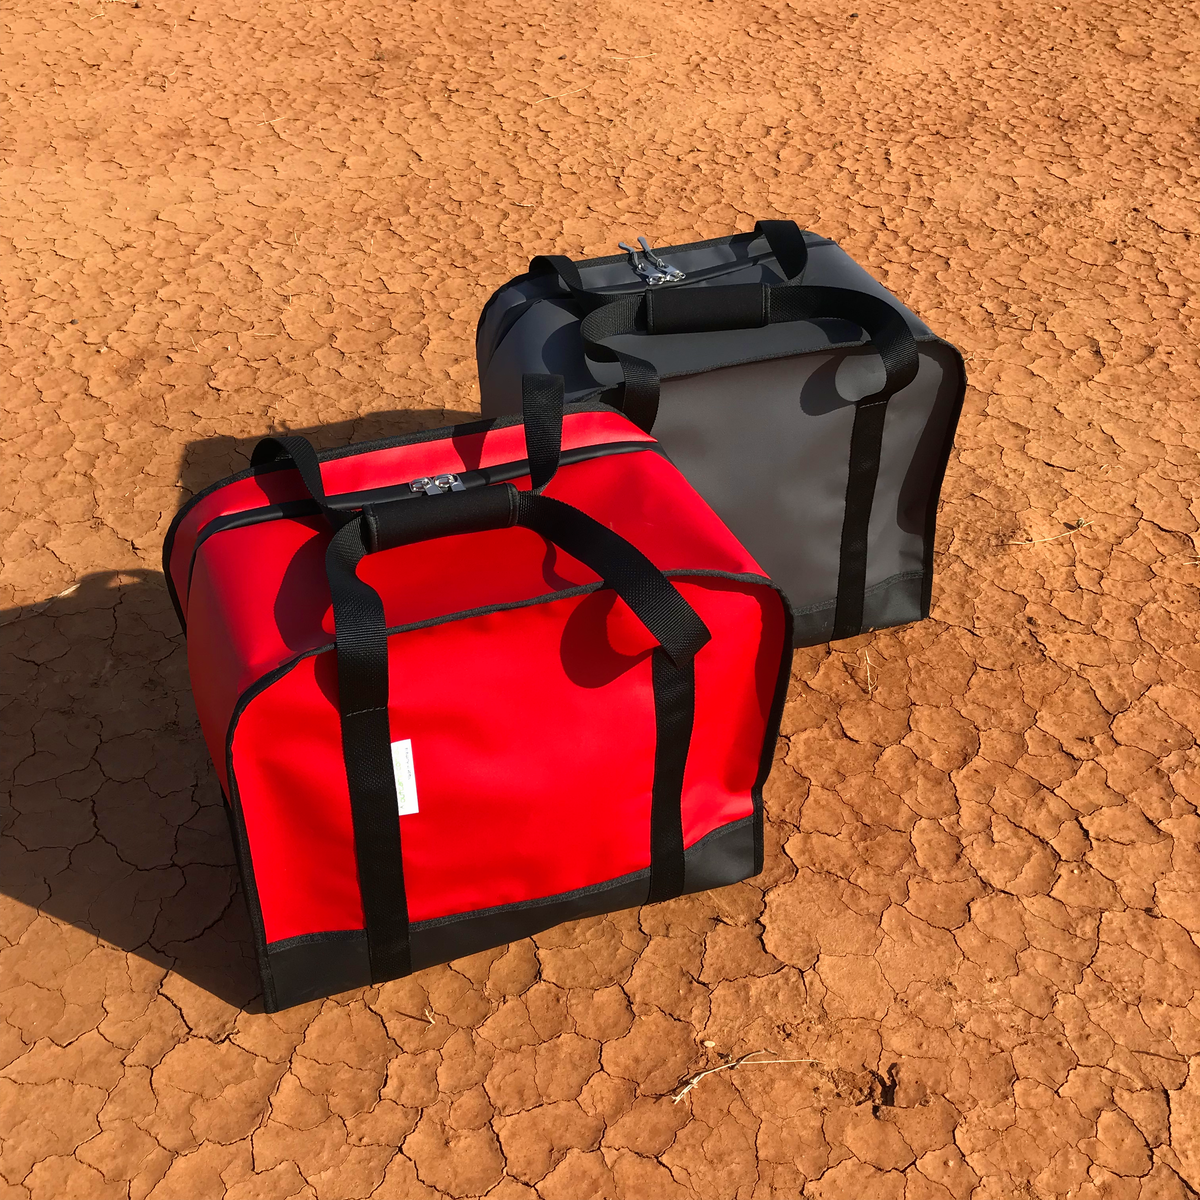 Outcamp camping bags made for Australian conditions